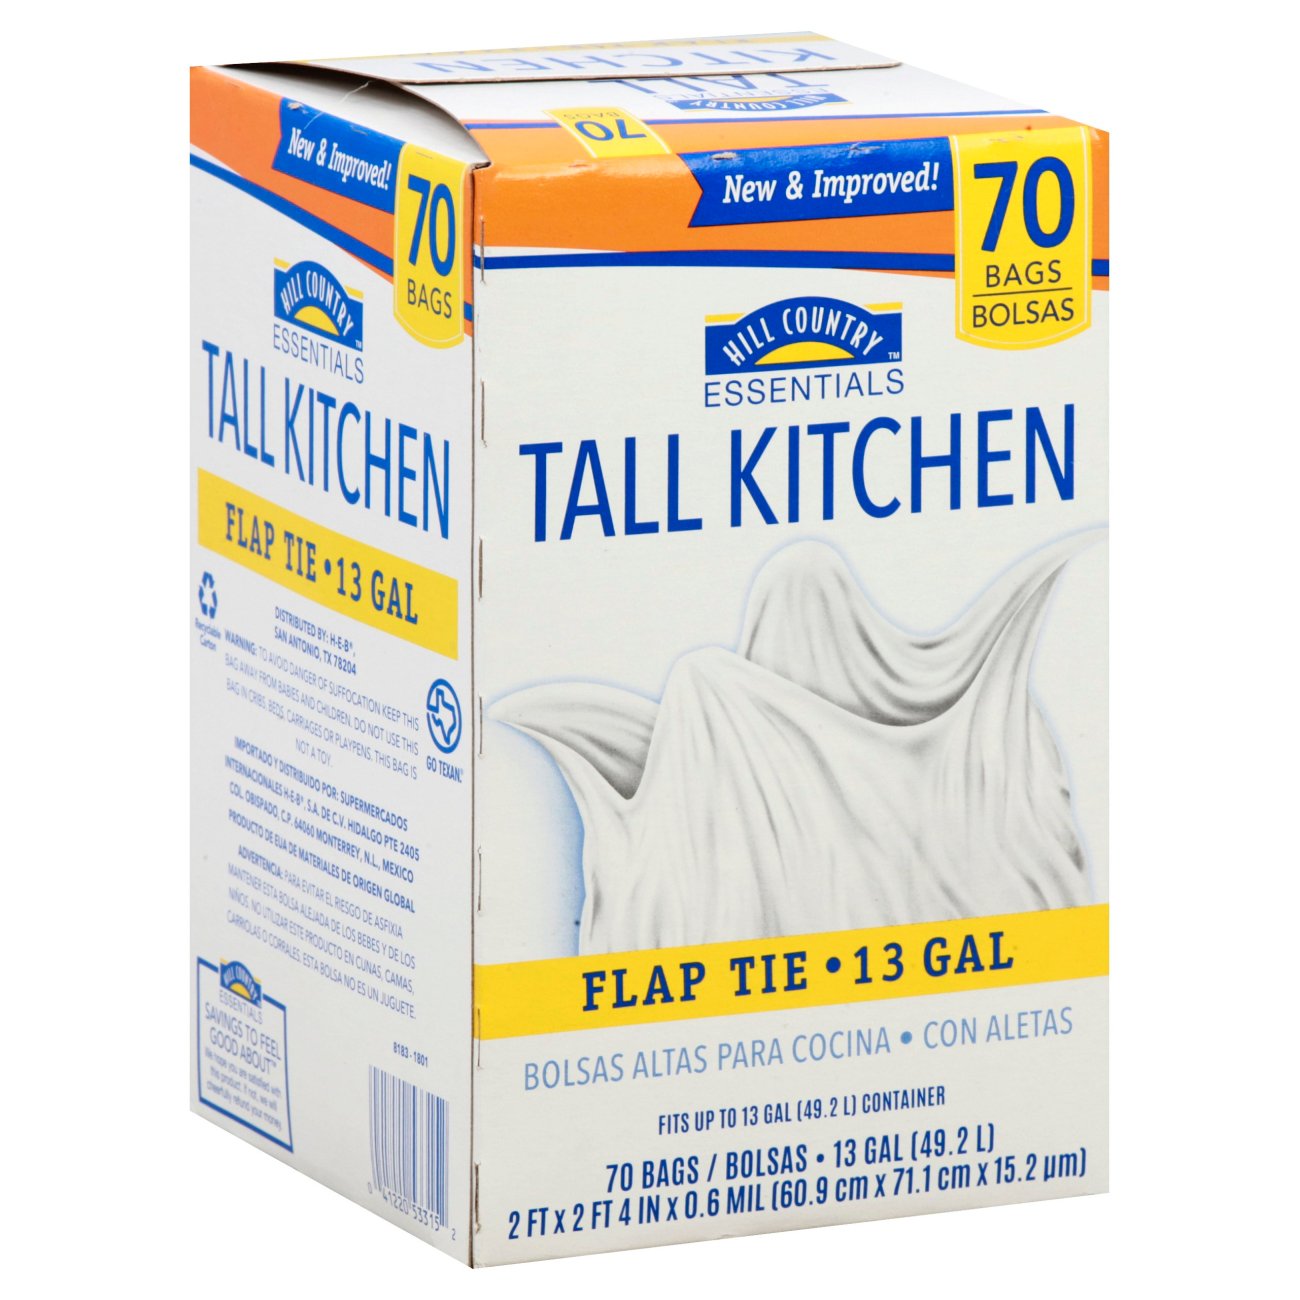 Hill Country Essentials Flap Tie Rose Scented Tall Kitchen 13 Gallon Trash  Bags